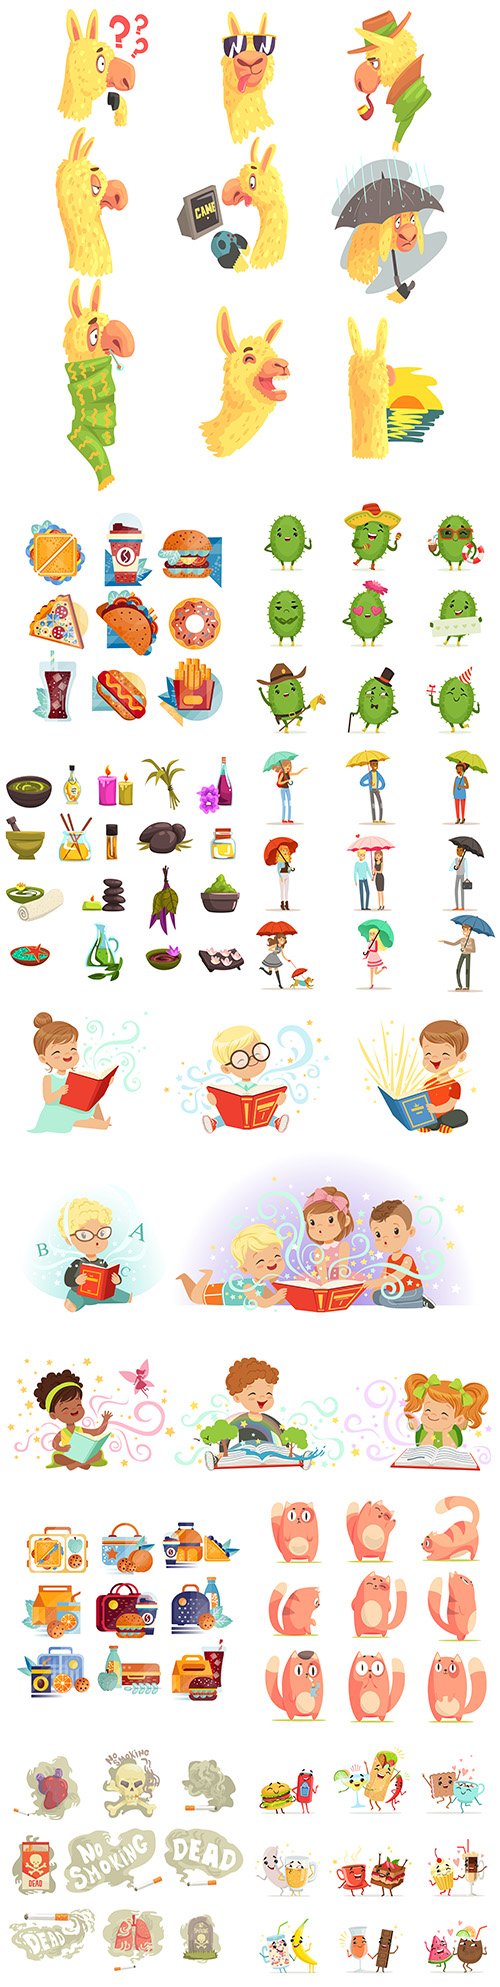 Food and drink icons and pretty funny characters design